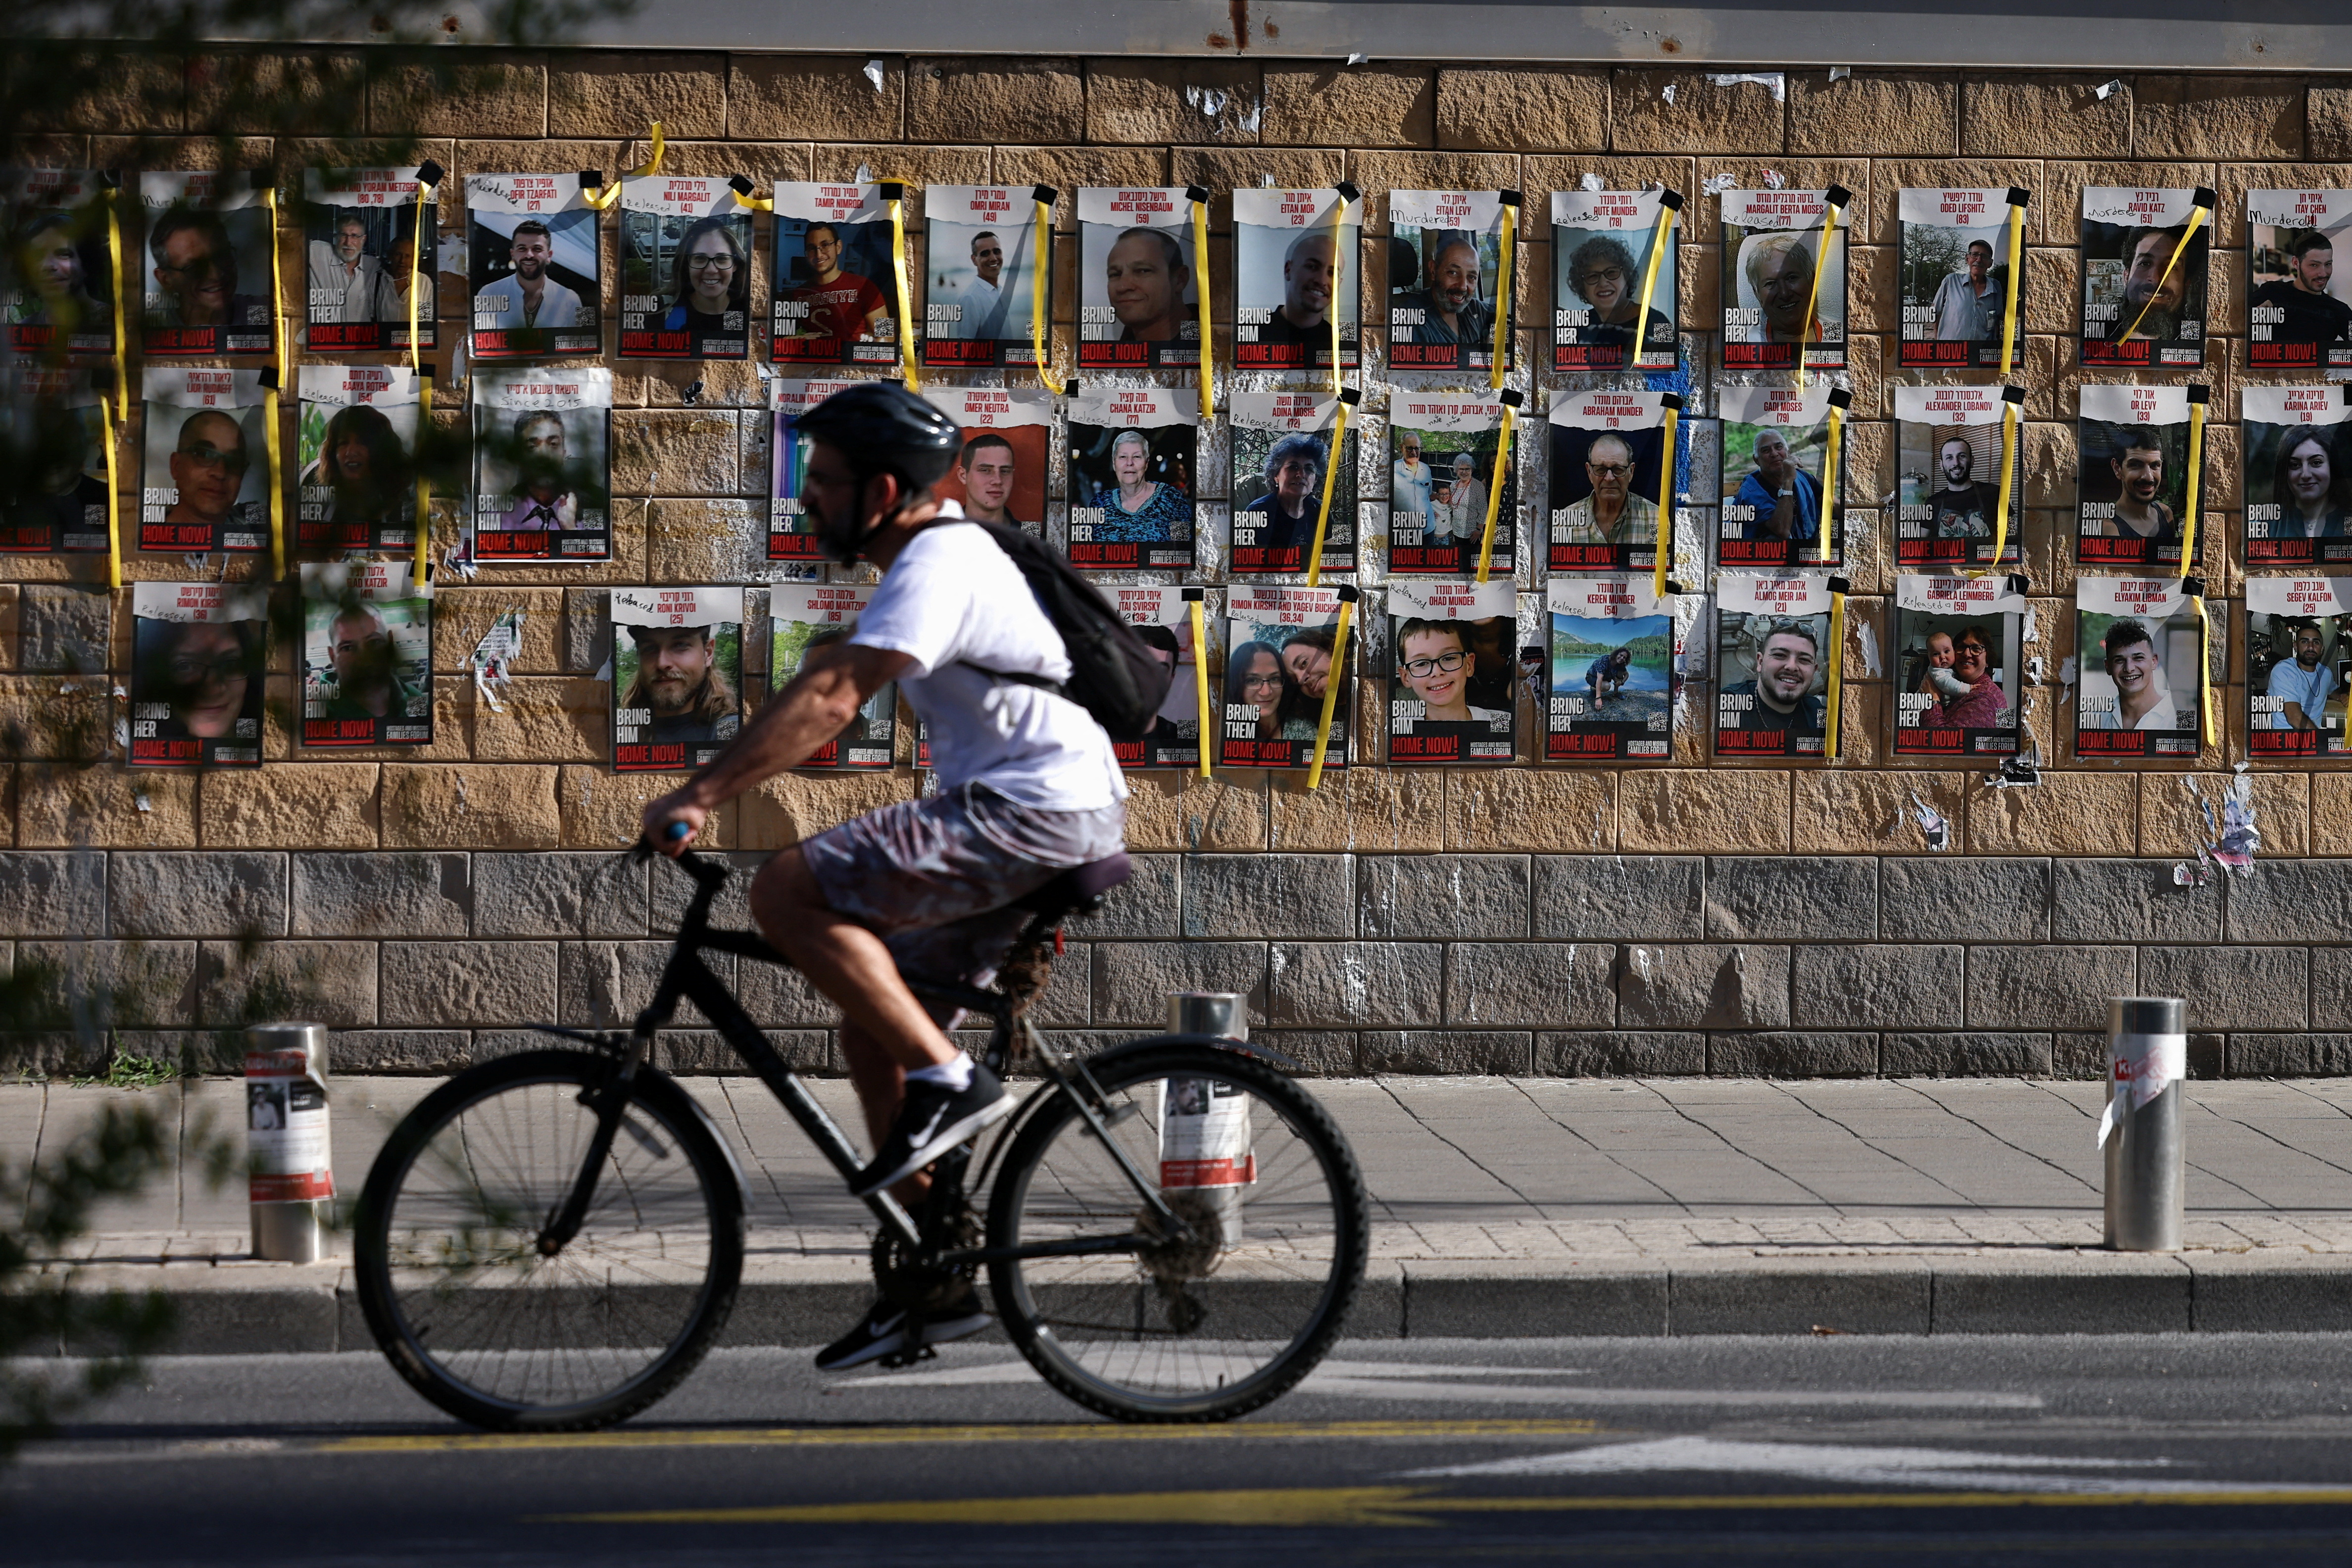 Man cycles past pictures of hostages kidnapped in October 7 attack on Israel by Hamas, in Tel Aviv